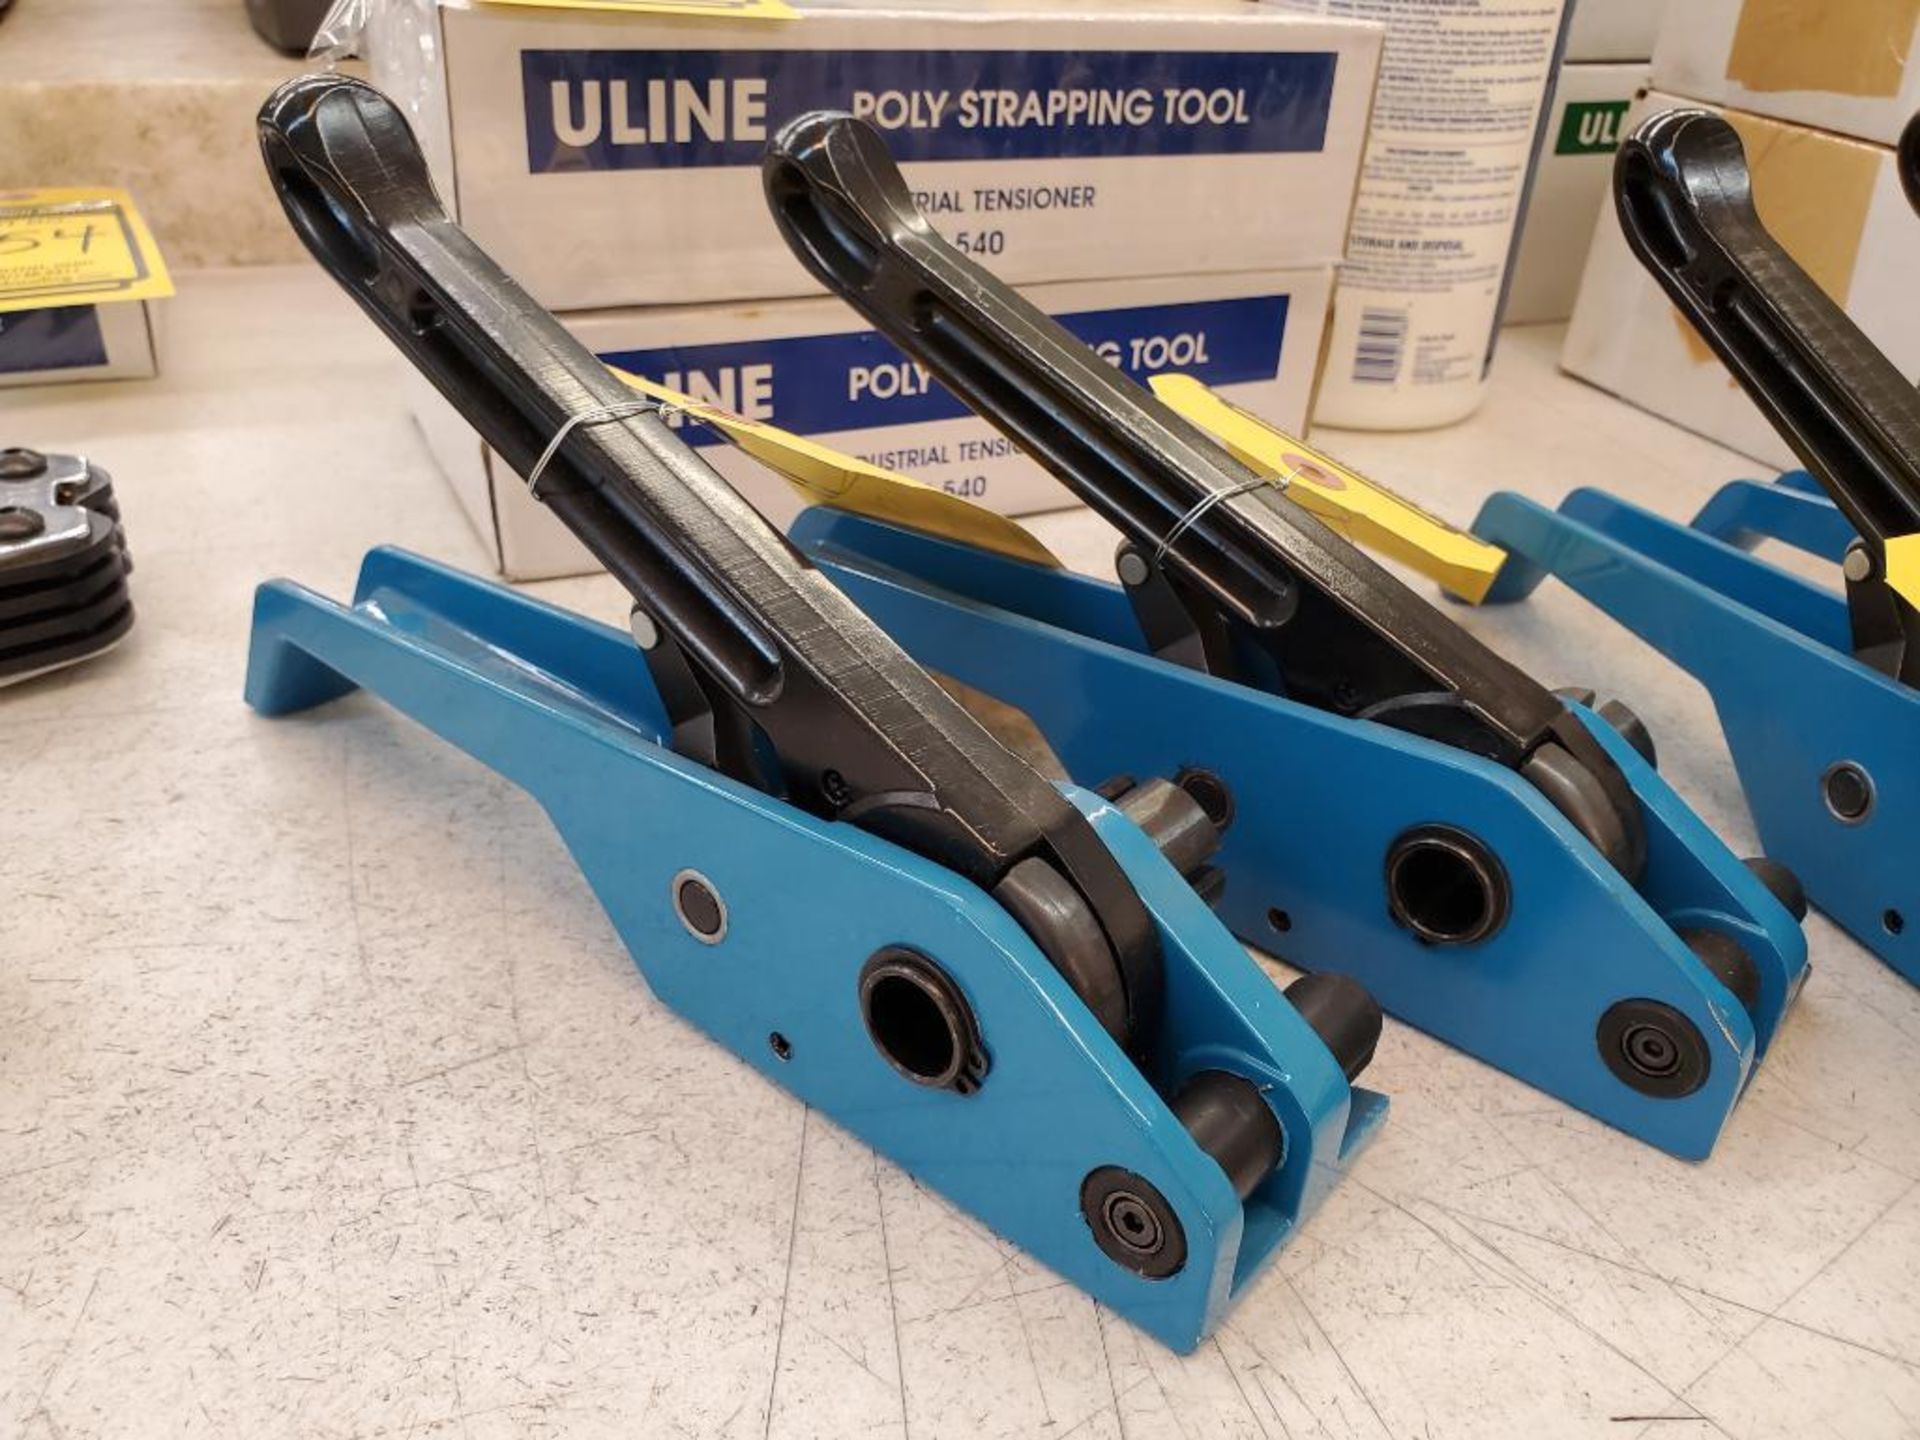 (2x) Uline Poly Strapping Tool Industrial Tensioner